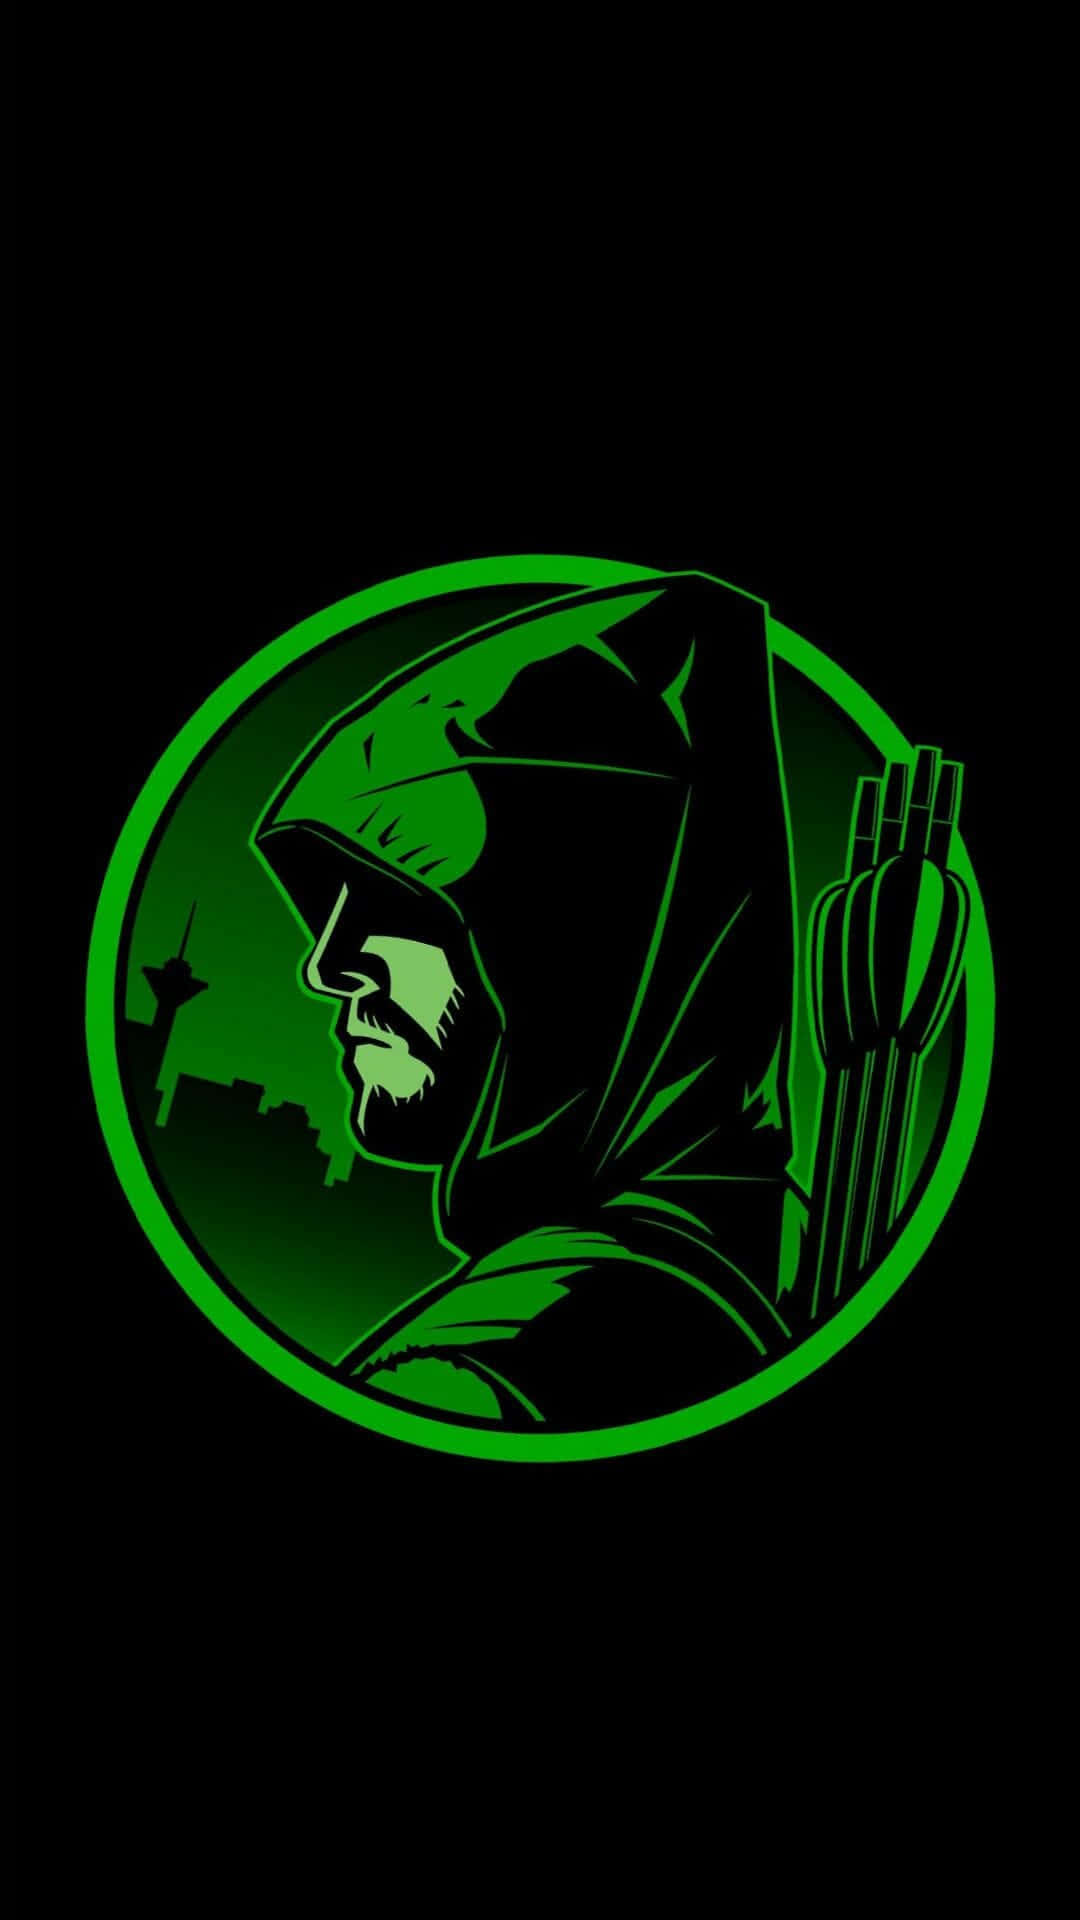 Show Off Your Superhero Side With This Bold And Vibrant Green Arrow Iphone Wallpaper Wallpaper